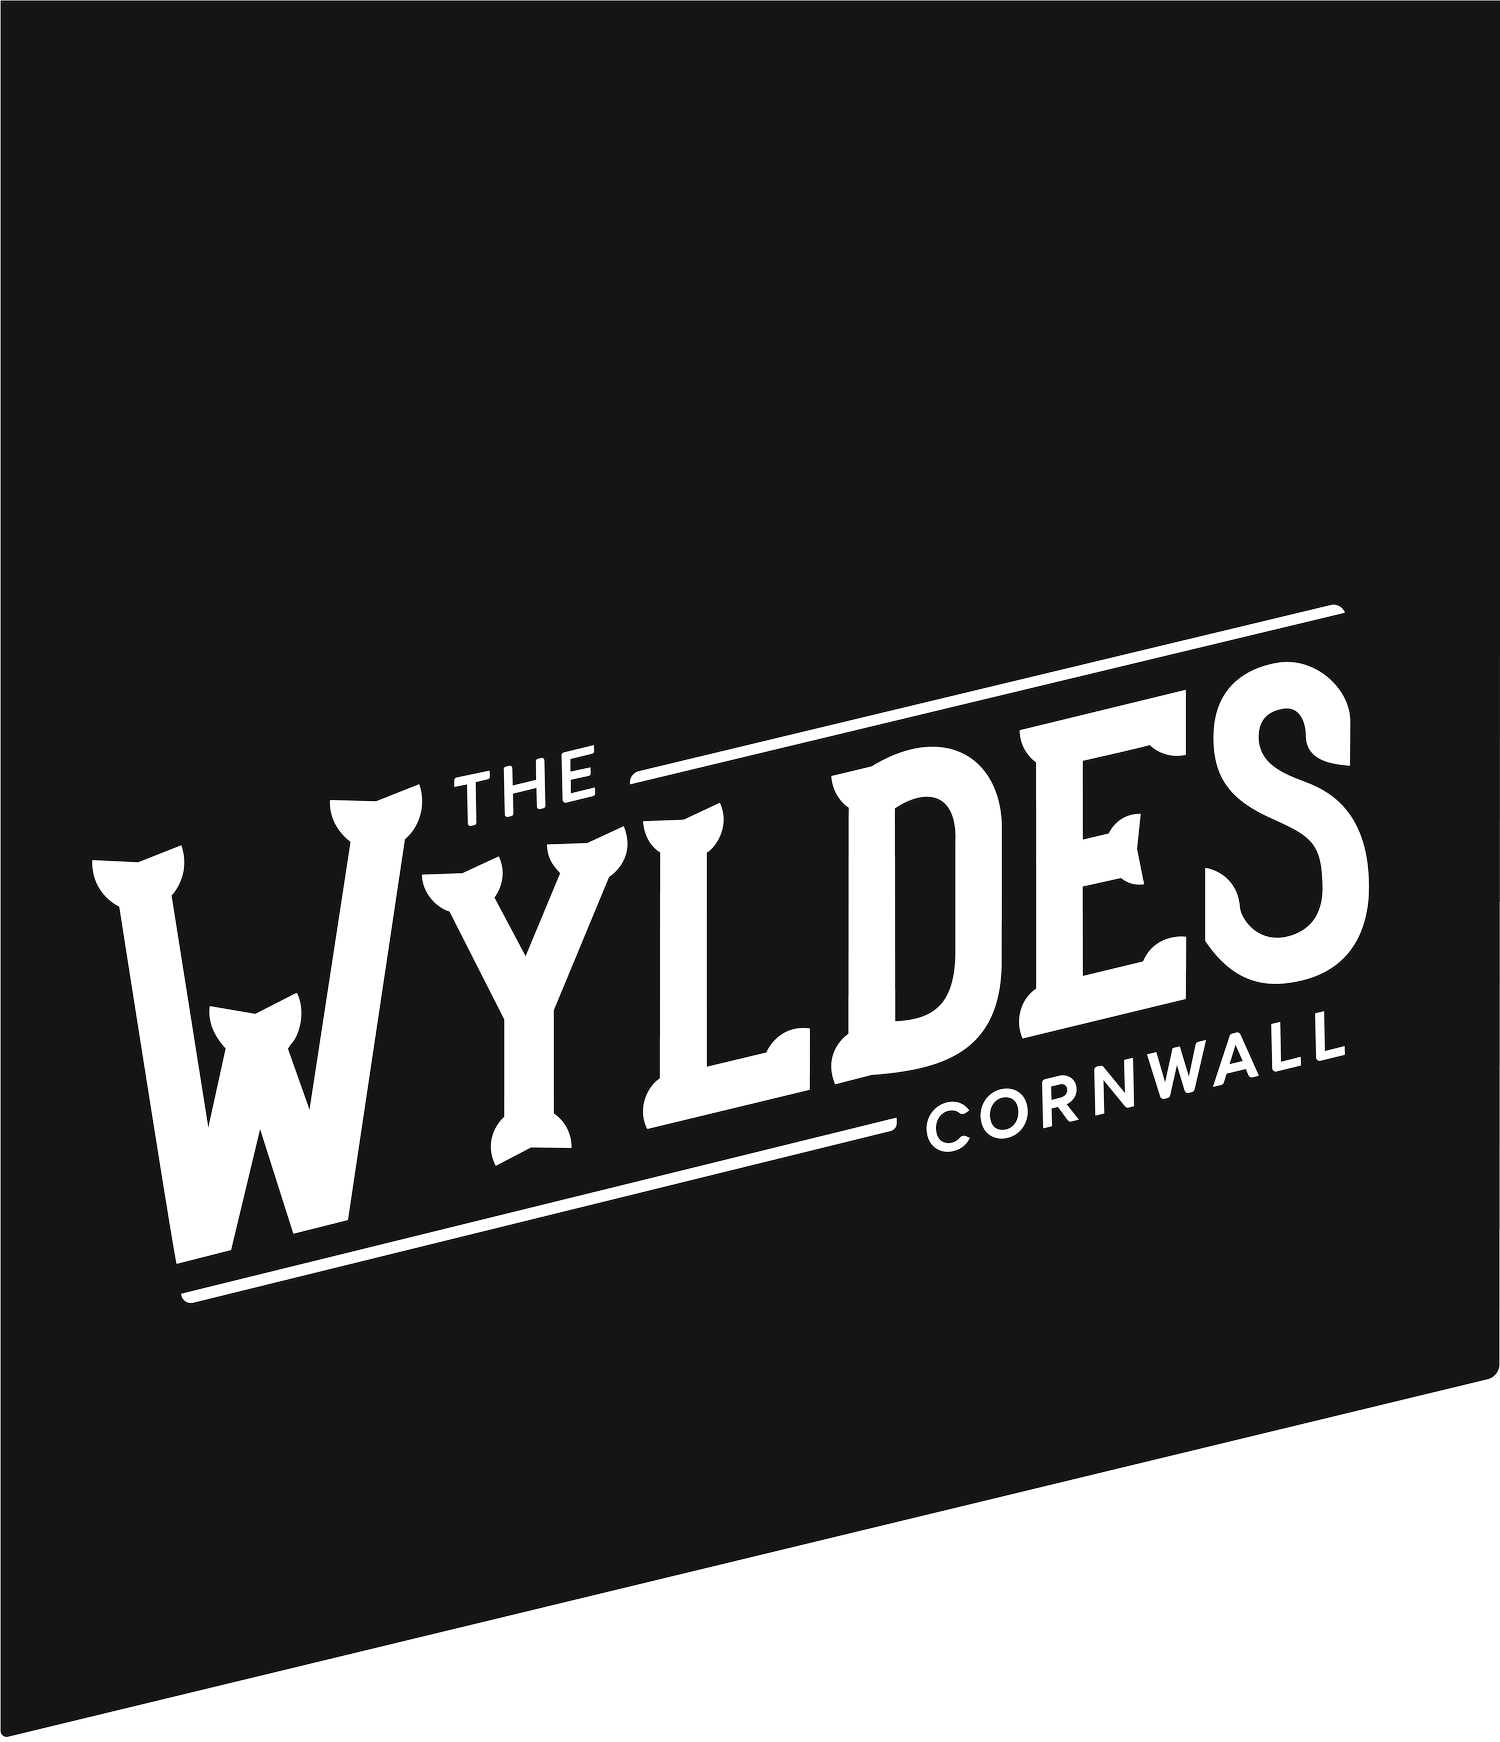 The Wyldes Cornwall - Award winning live music &amp; events venue